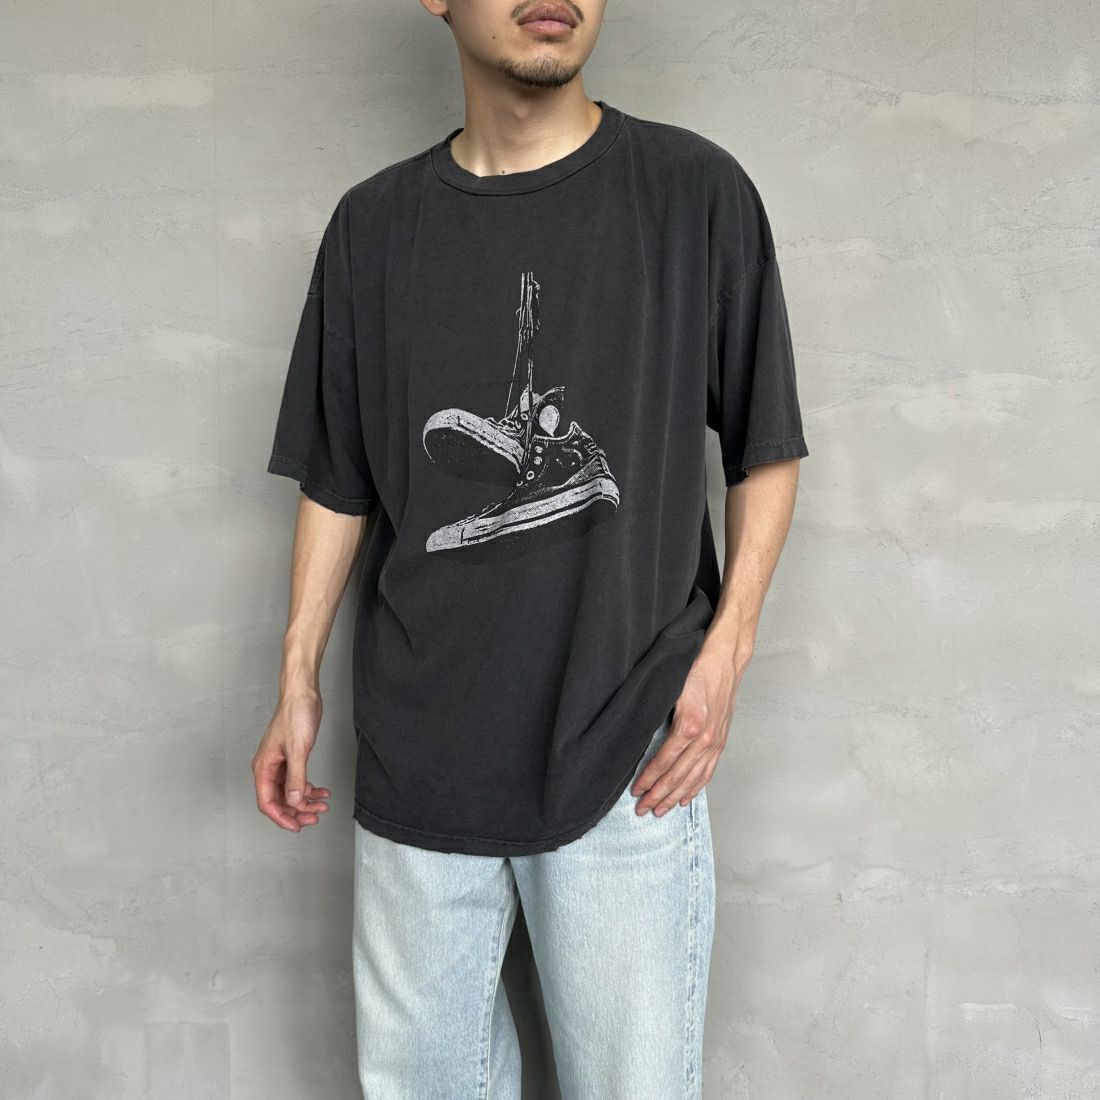 REMI RELIEF [レミレリーフ] 別注 ビッグプリントTシャツ SNEAKERS  [RN26349310-JF]｜ジーンズファクトリー公式通販サイト - JEANS FACTORY Online Shop